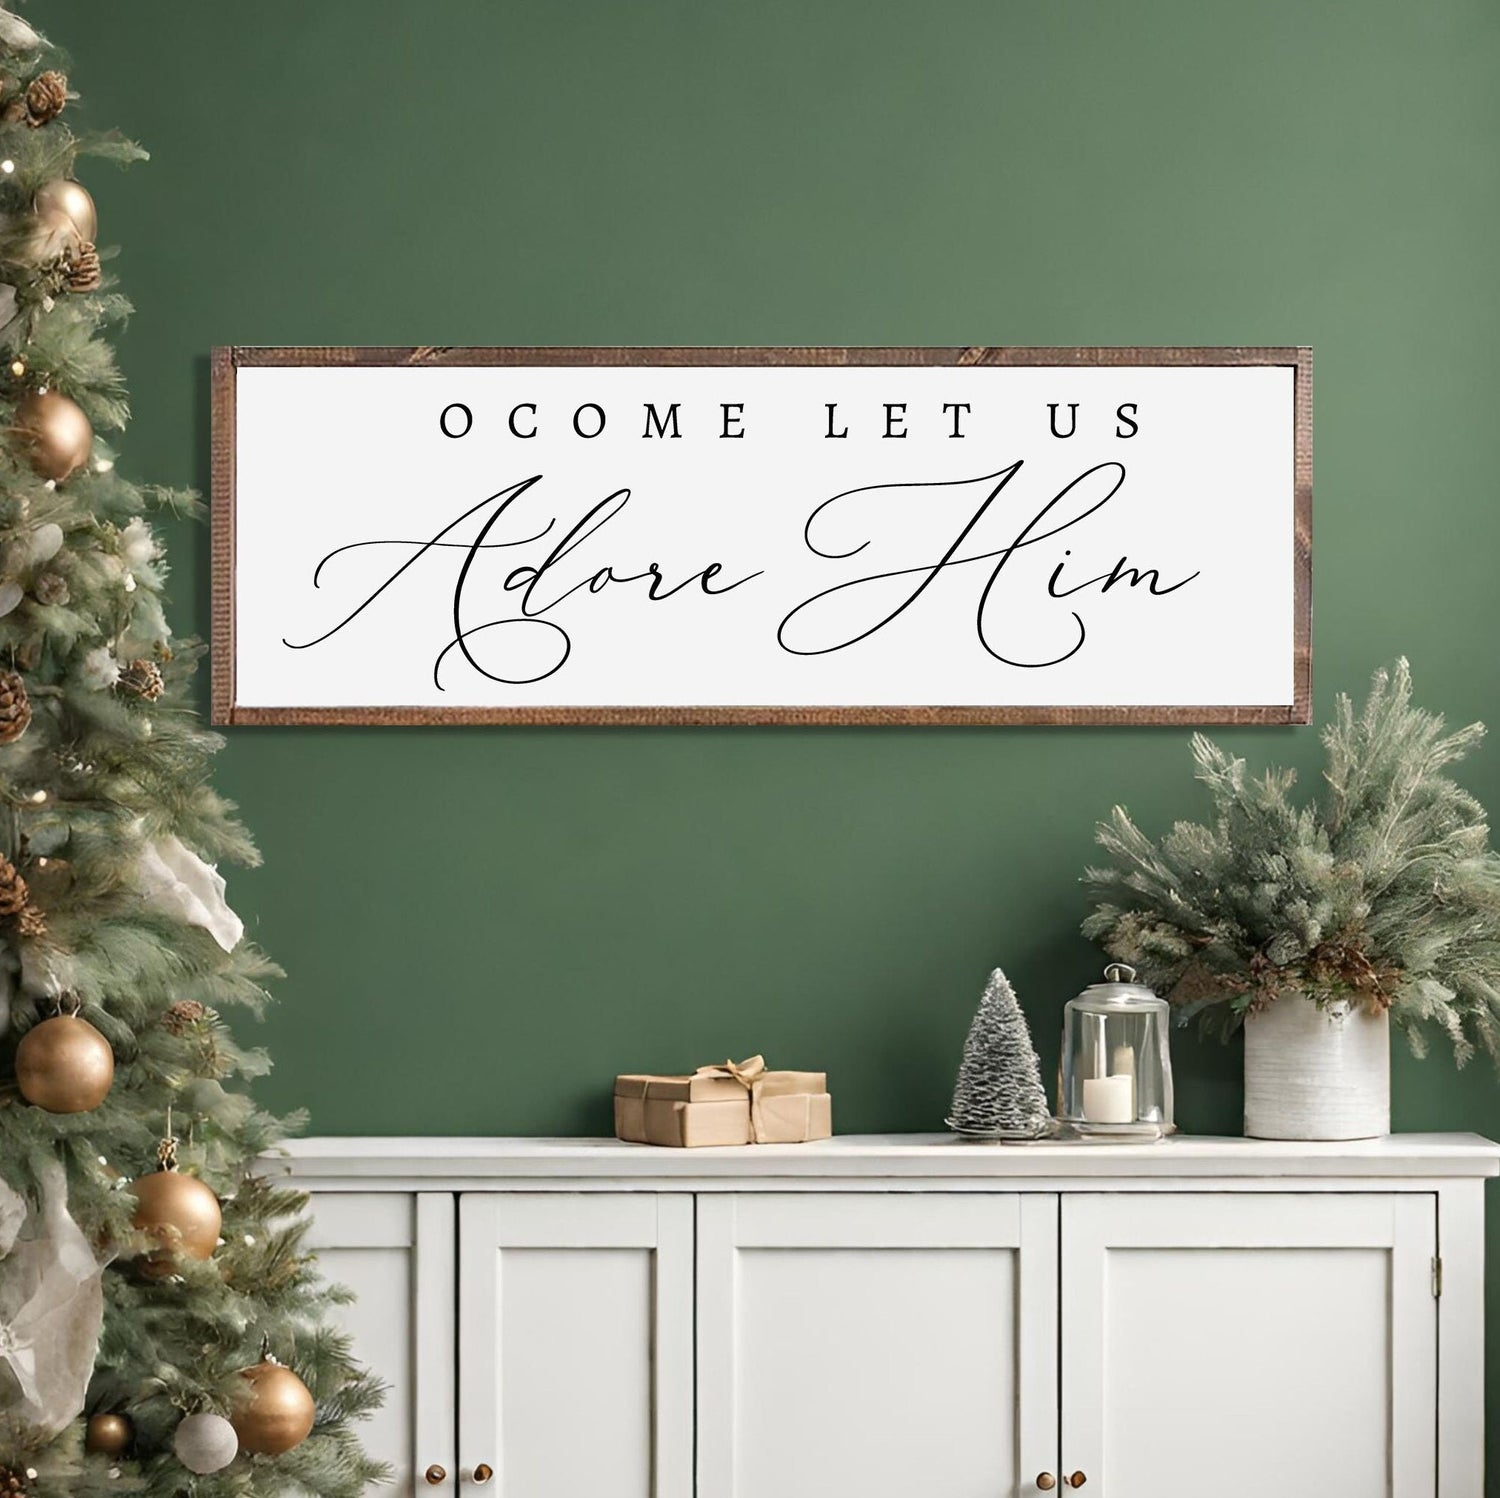 O Come Let Us Adore Him - Christmas Home Décor, Modern Farmhouse Wood Sign | Large Christmas wood sign | Christmas Décor, Christian Wall Art